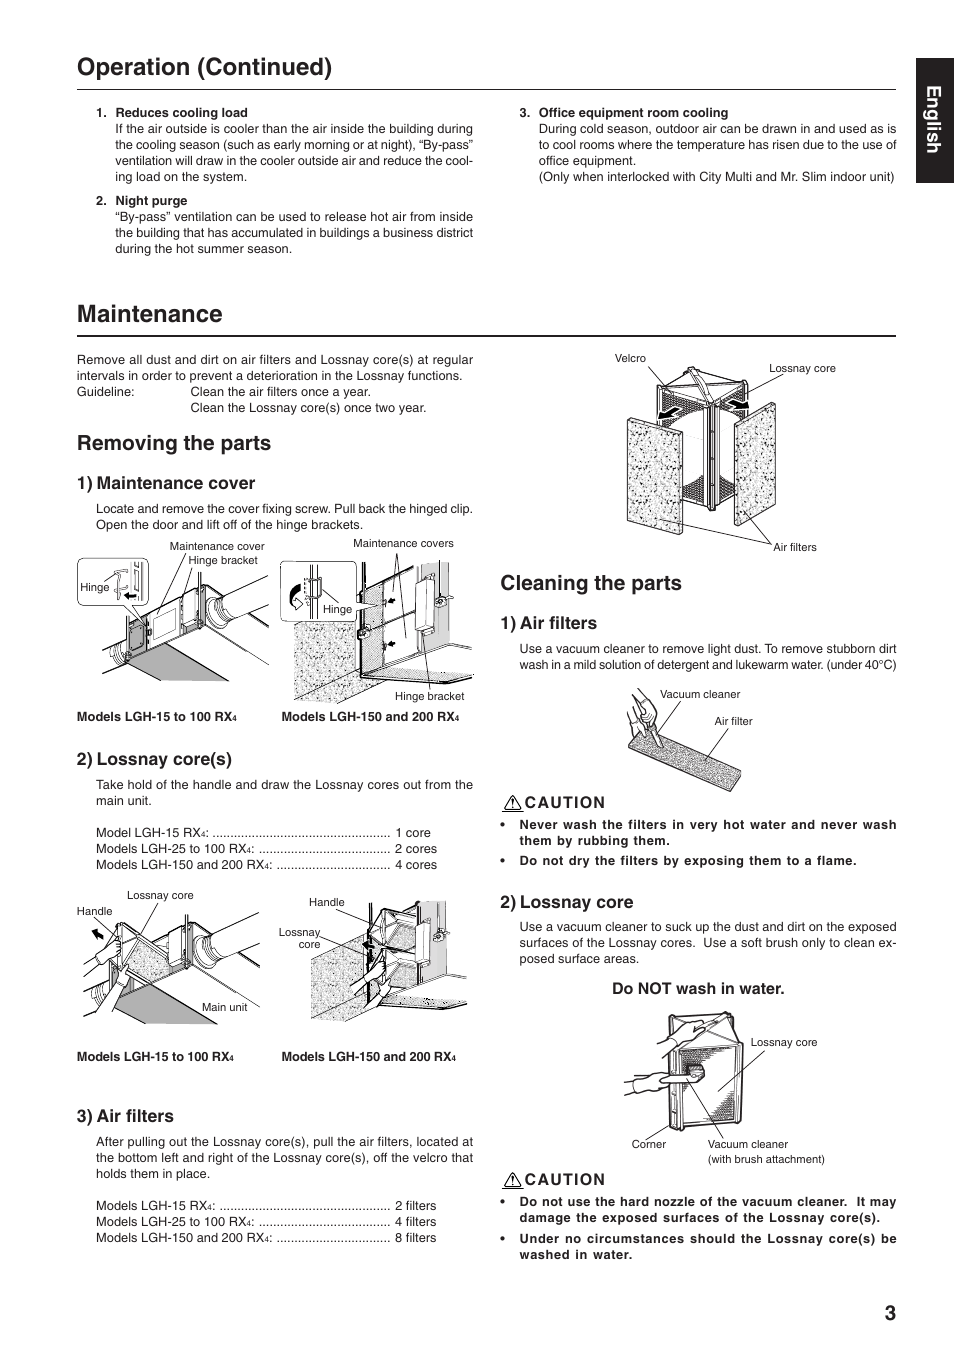 Maintenance, Operation (continued), Removing the parts | MITSUBISHI  ELECTRIC LOSSNAY LGH-15RX4-E User Manual | Page 3 / 4